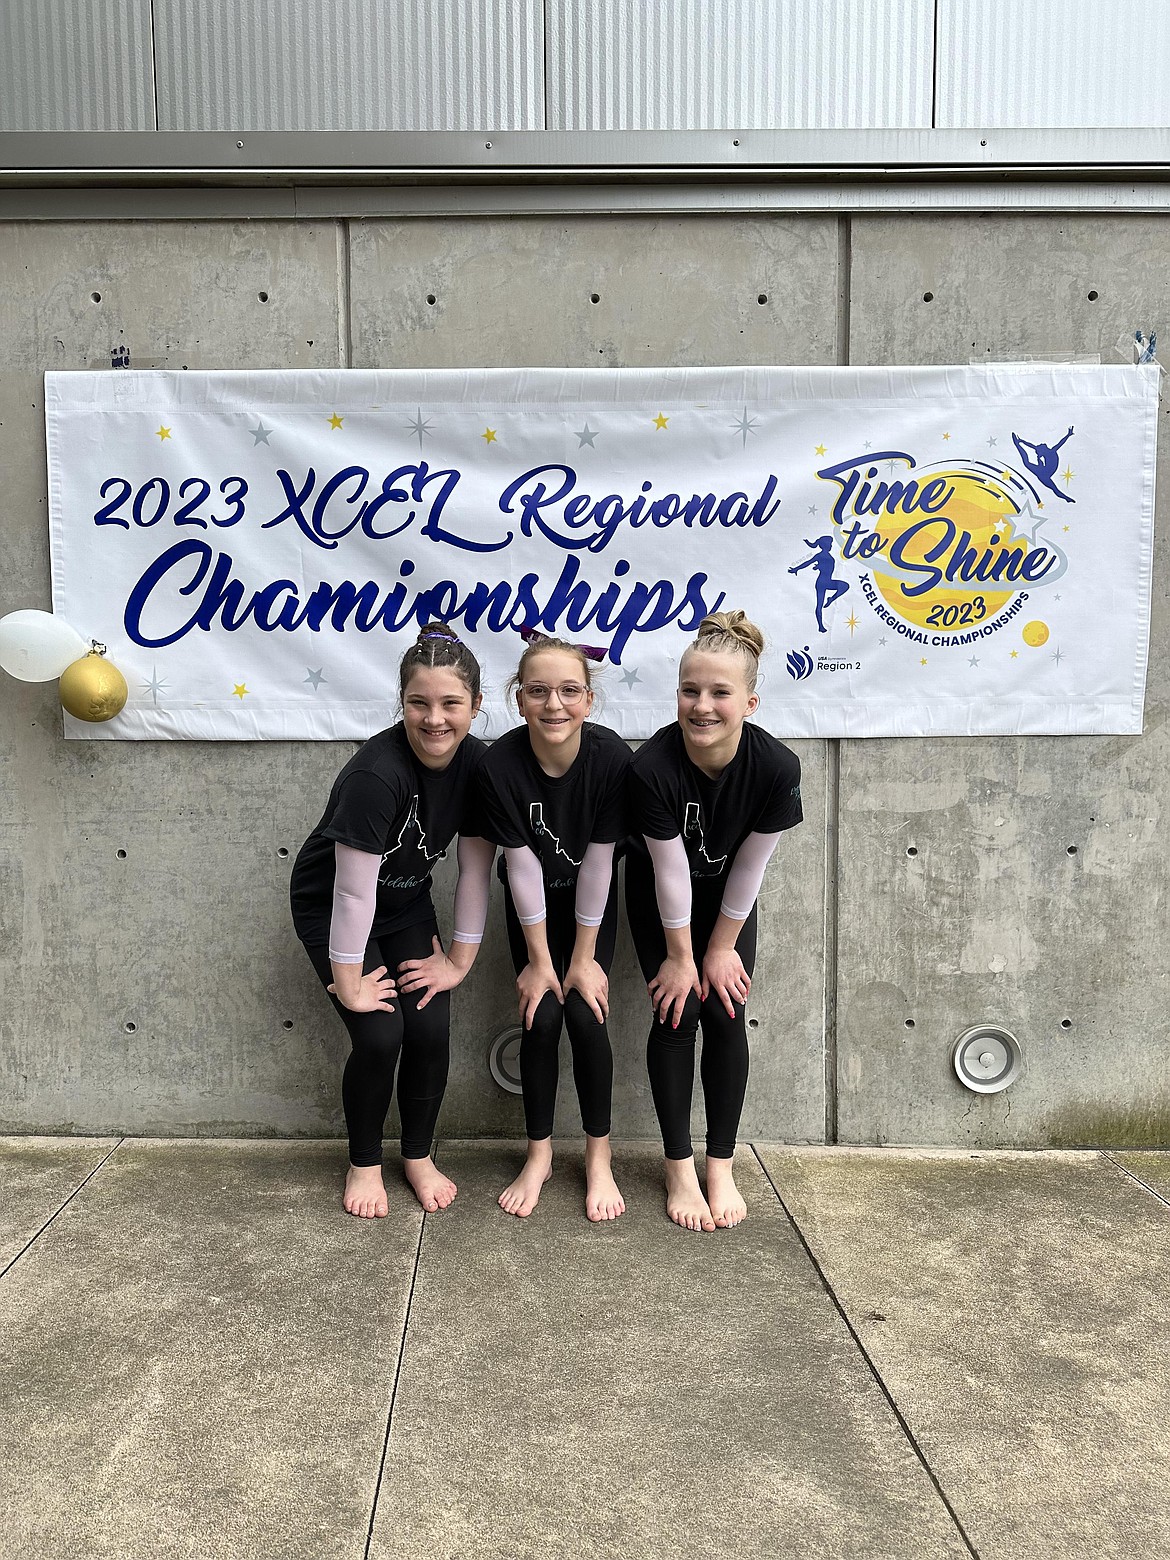 Courtesy photo
Avant Coeur Gymnastics Junior Xcel Golds competed at the Region 2 Xcel Regional Championships in Everett, Wash. From left are Audri Madsen, Lily Kramer and Liliana Olind.